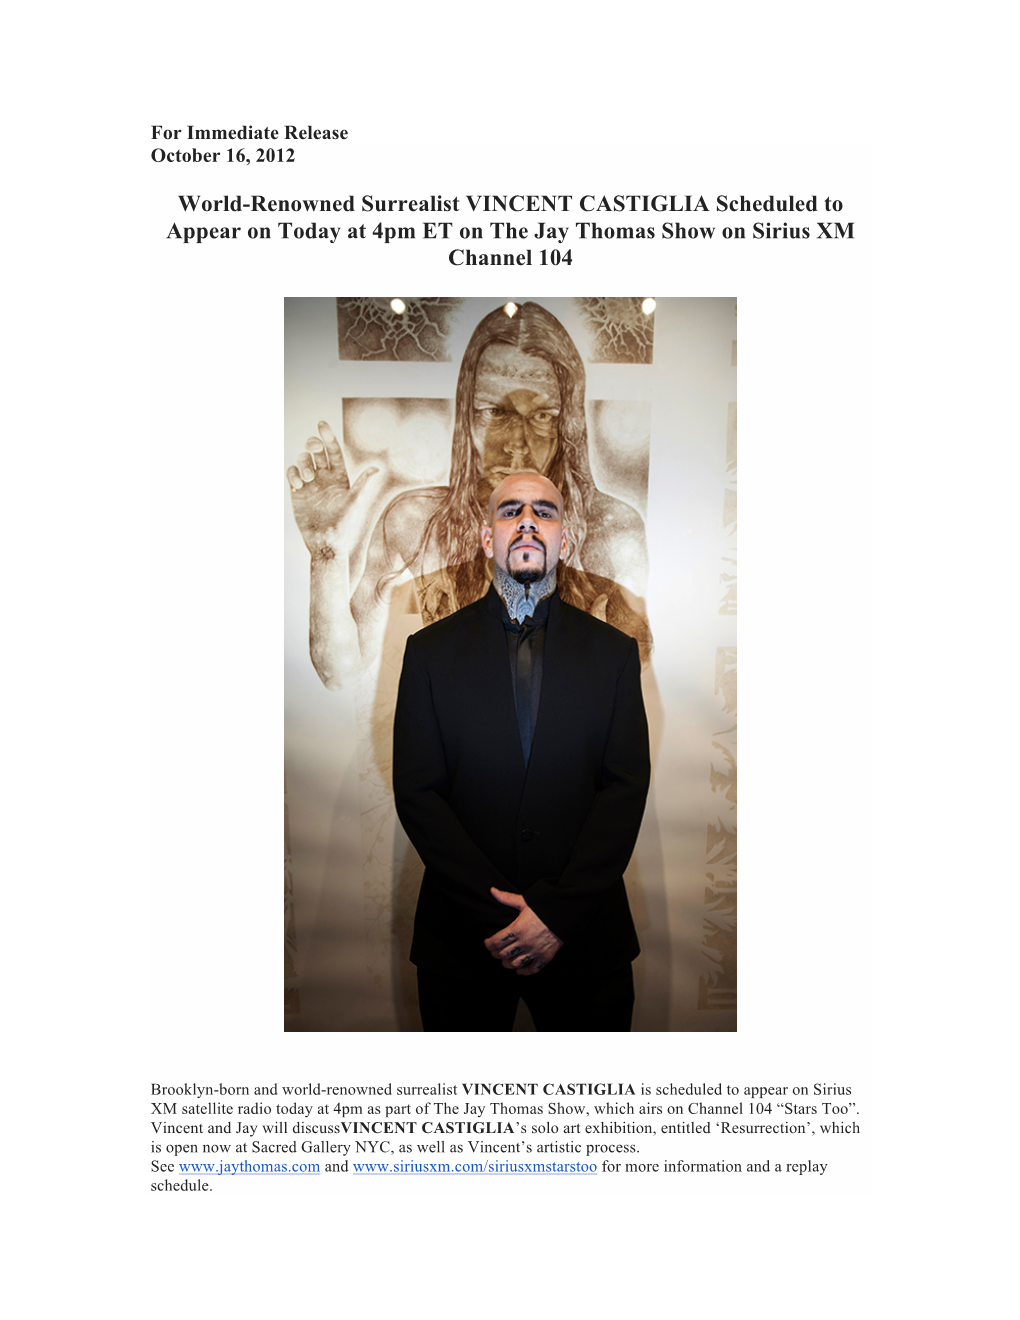 World-Renowned Surrealist VINCENT CASTIGLIA Scheduled to Appear on Today at 4Pm ET on the Jay Thomas Show on Sirius XM Channel 104